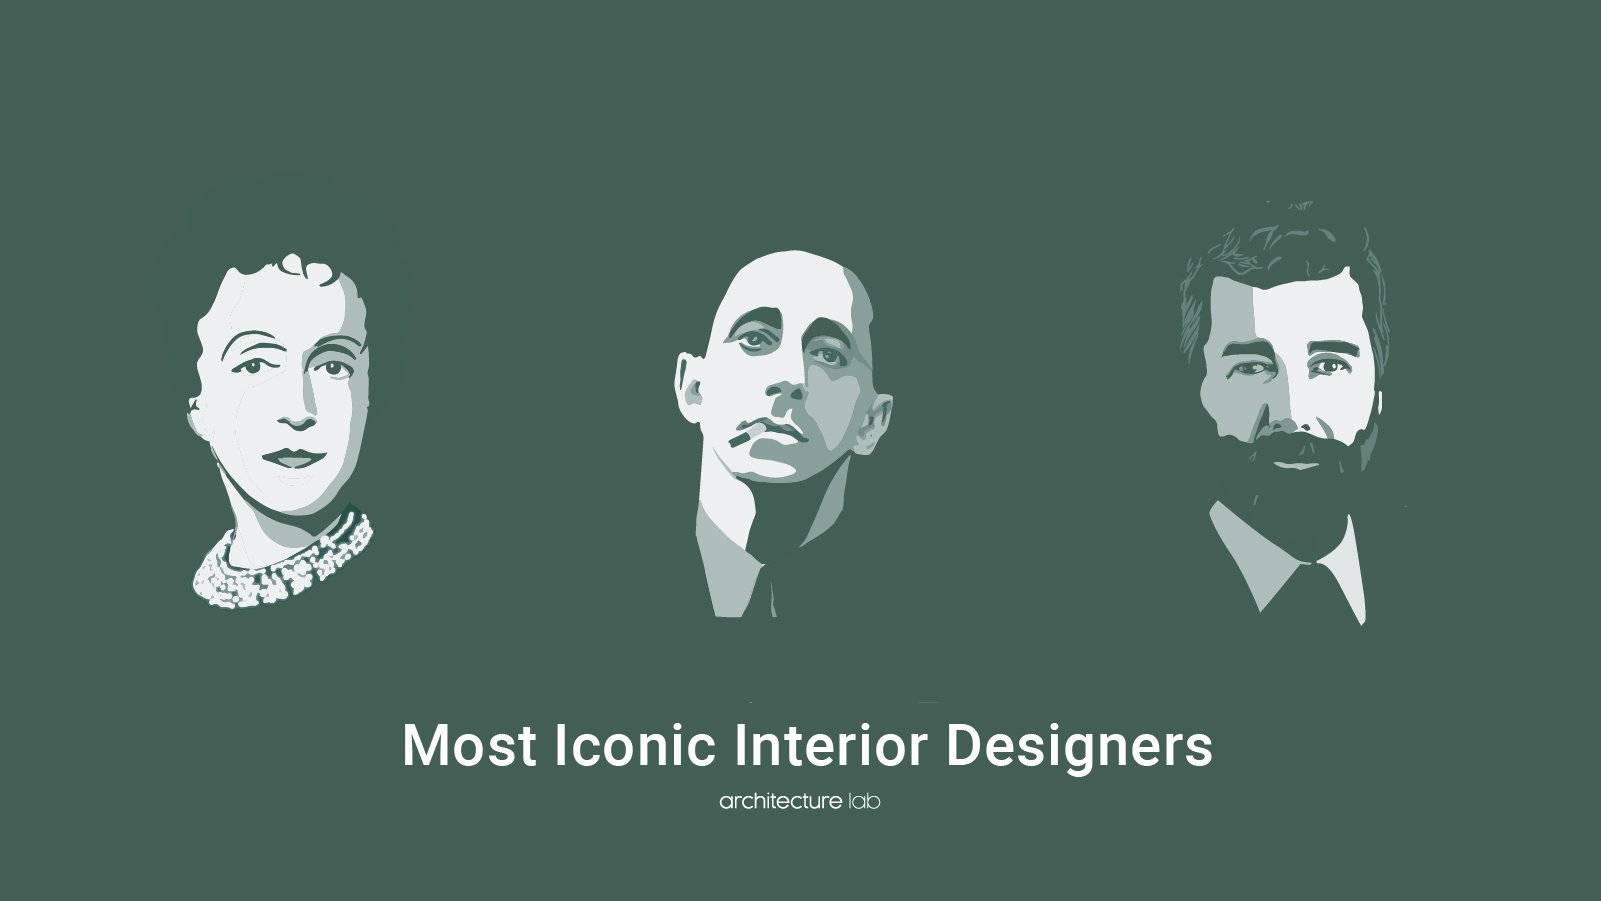 Most famous interior designers in modern history